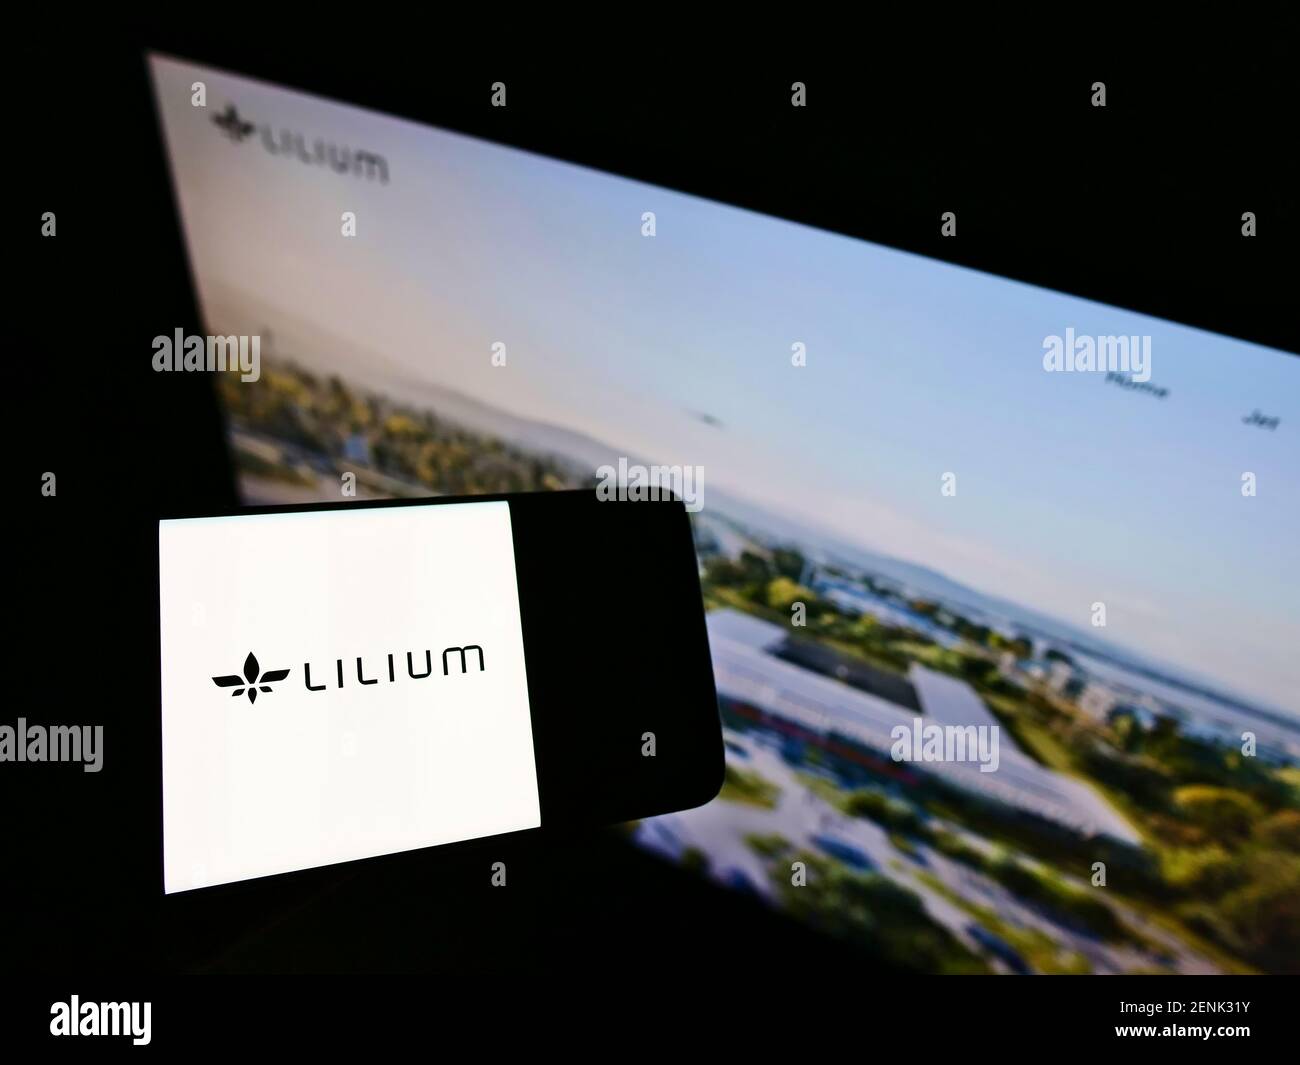 Person holding mobile phone with logo of German aircraft manufacturer Lilium GmbH (Lilium Jet) on screen in front of webpage. Focus on phone display. Stock Photo